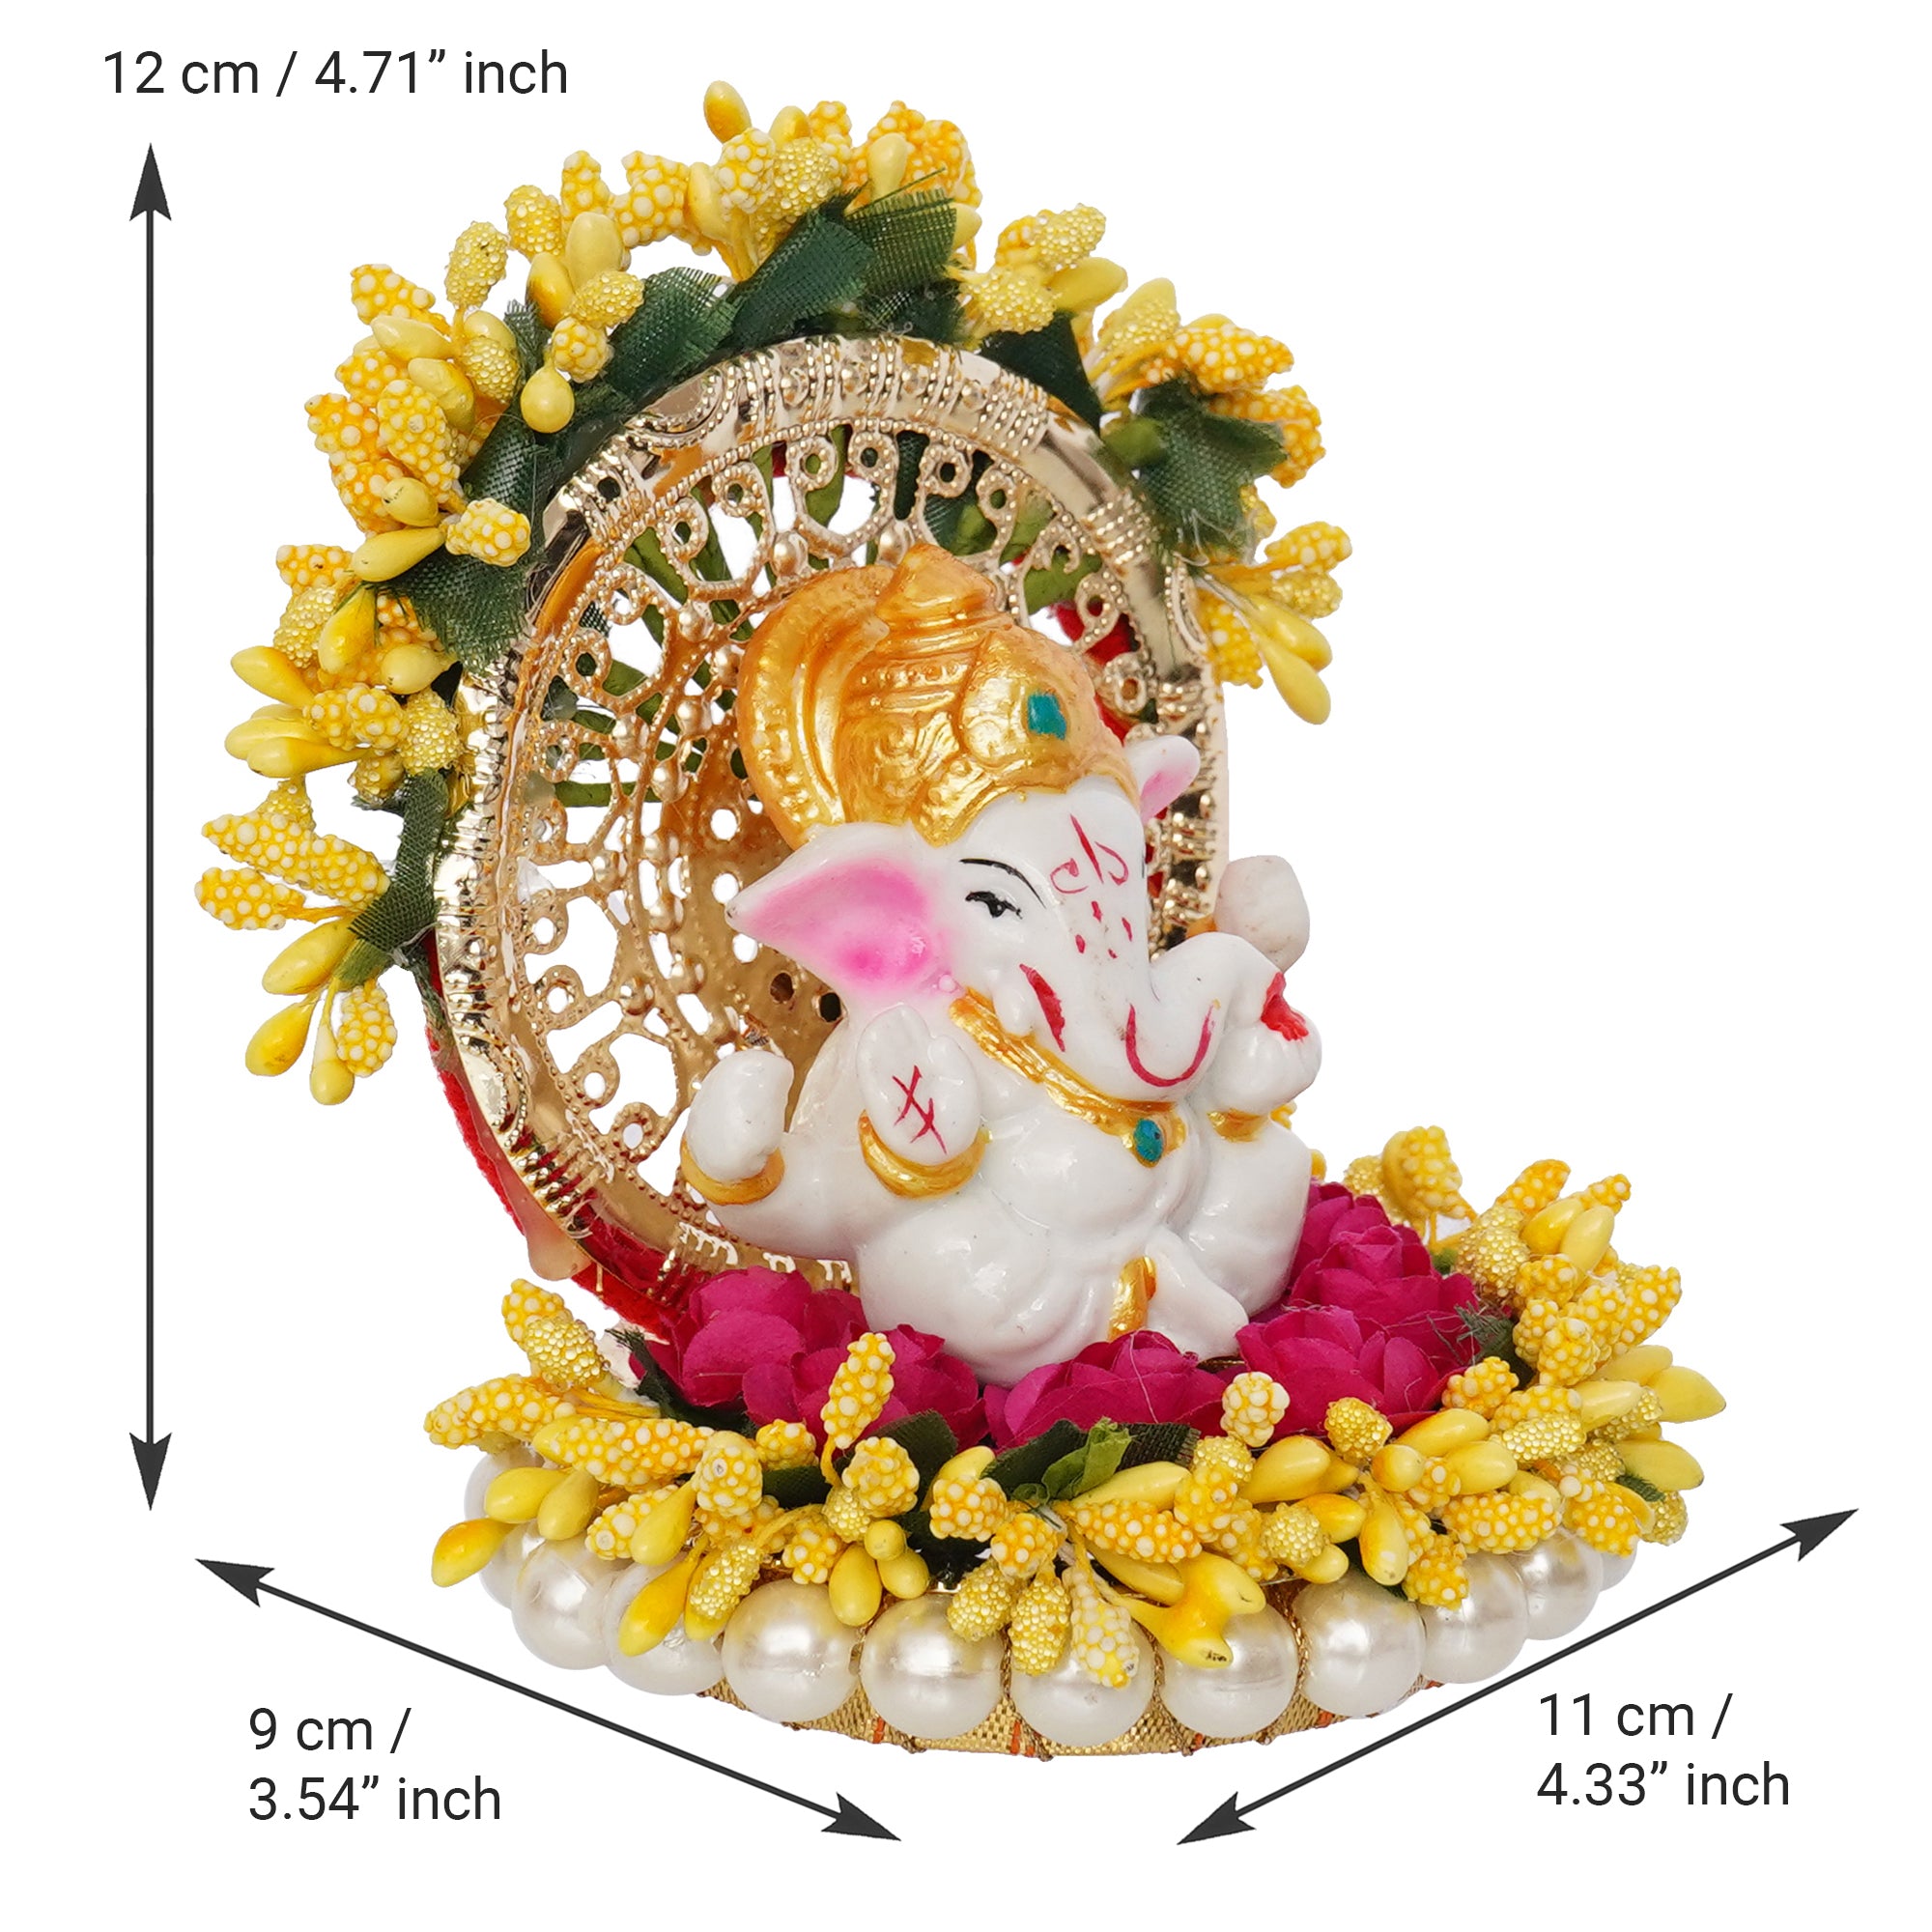 Polyresin Lord Ganesha Idol on Handcrafted Yellow Floral Plate for Home and Car Dashboard 3